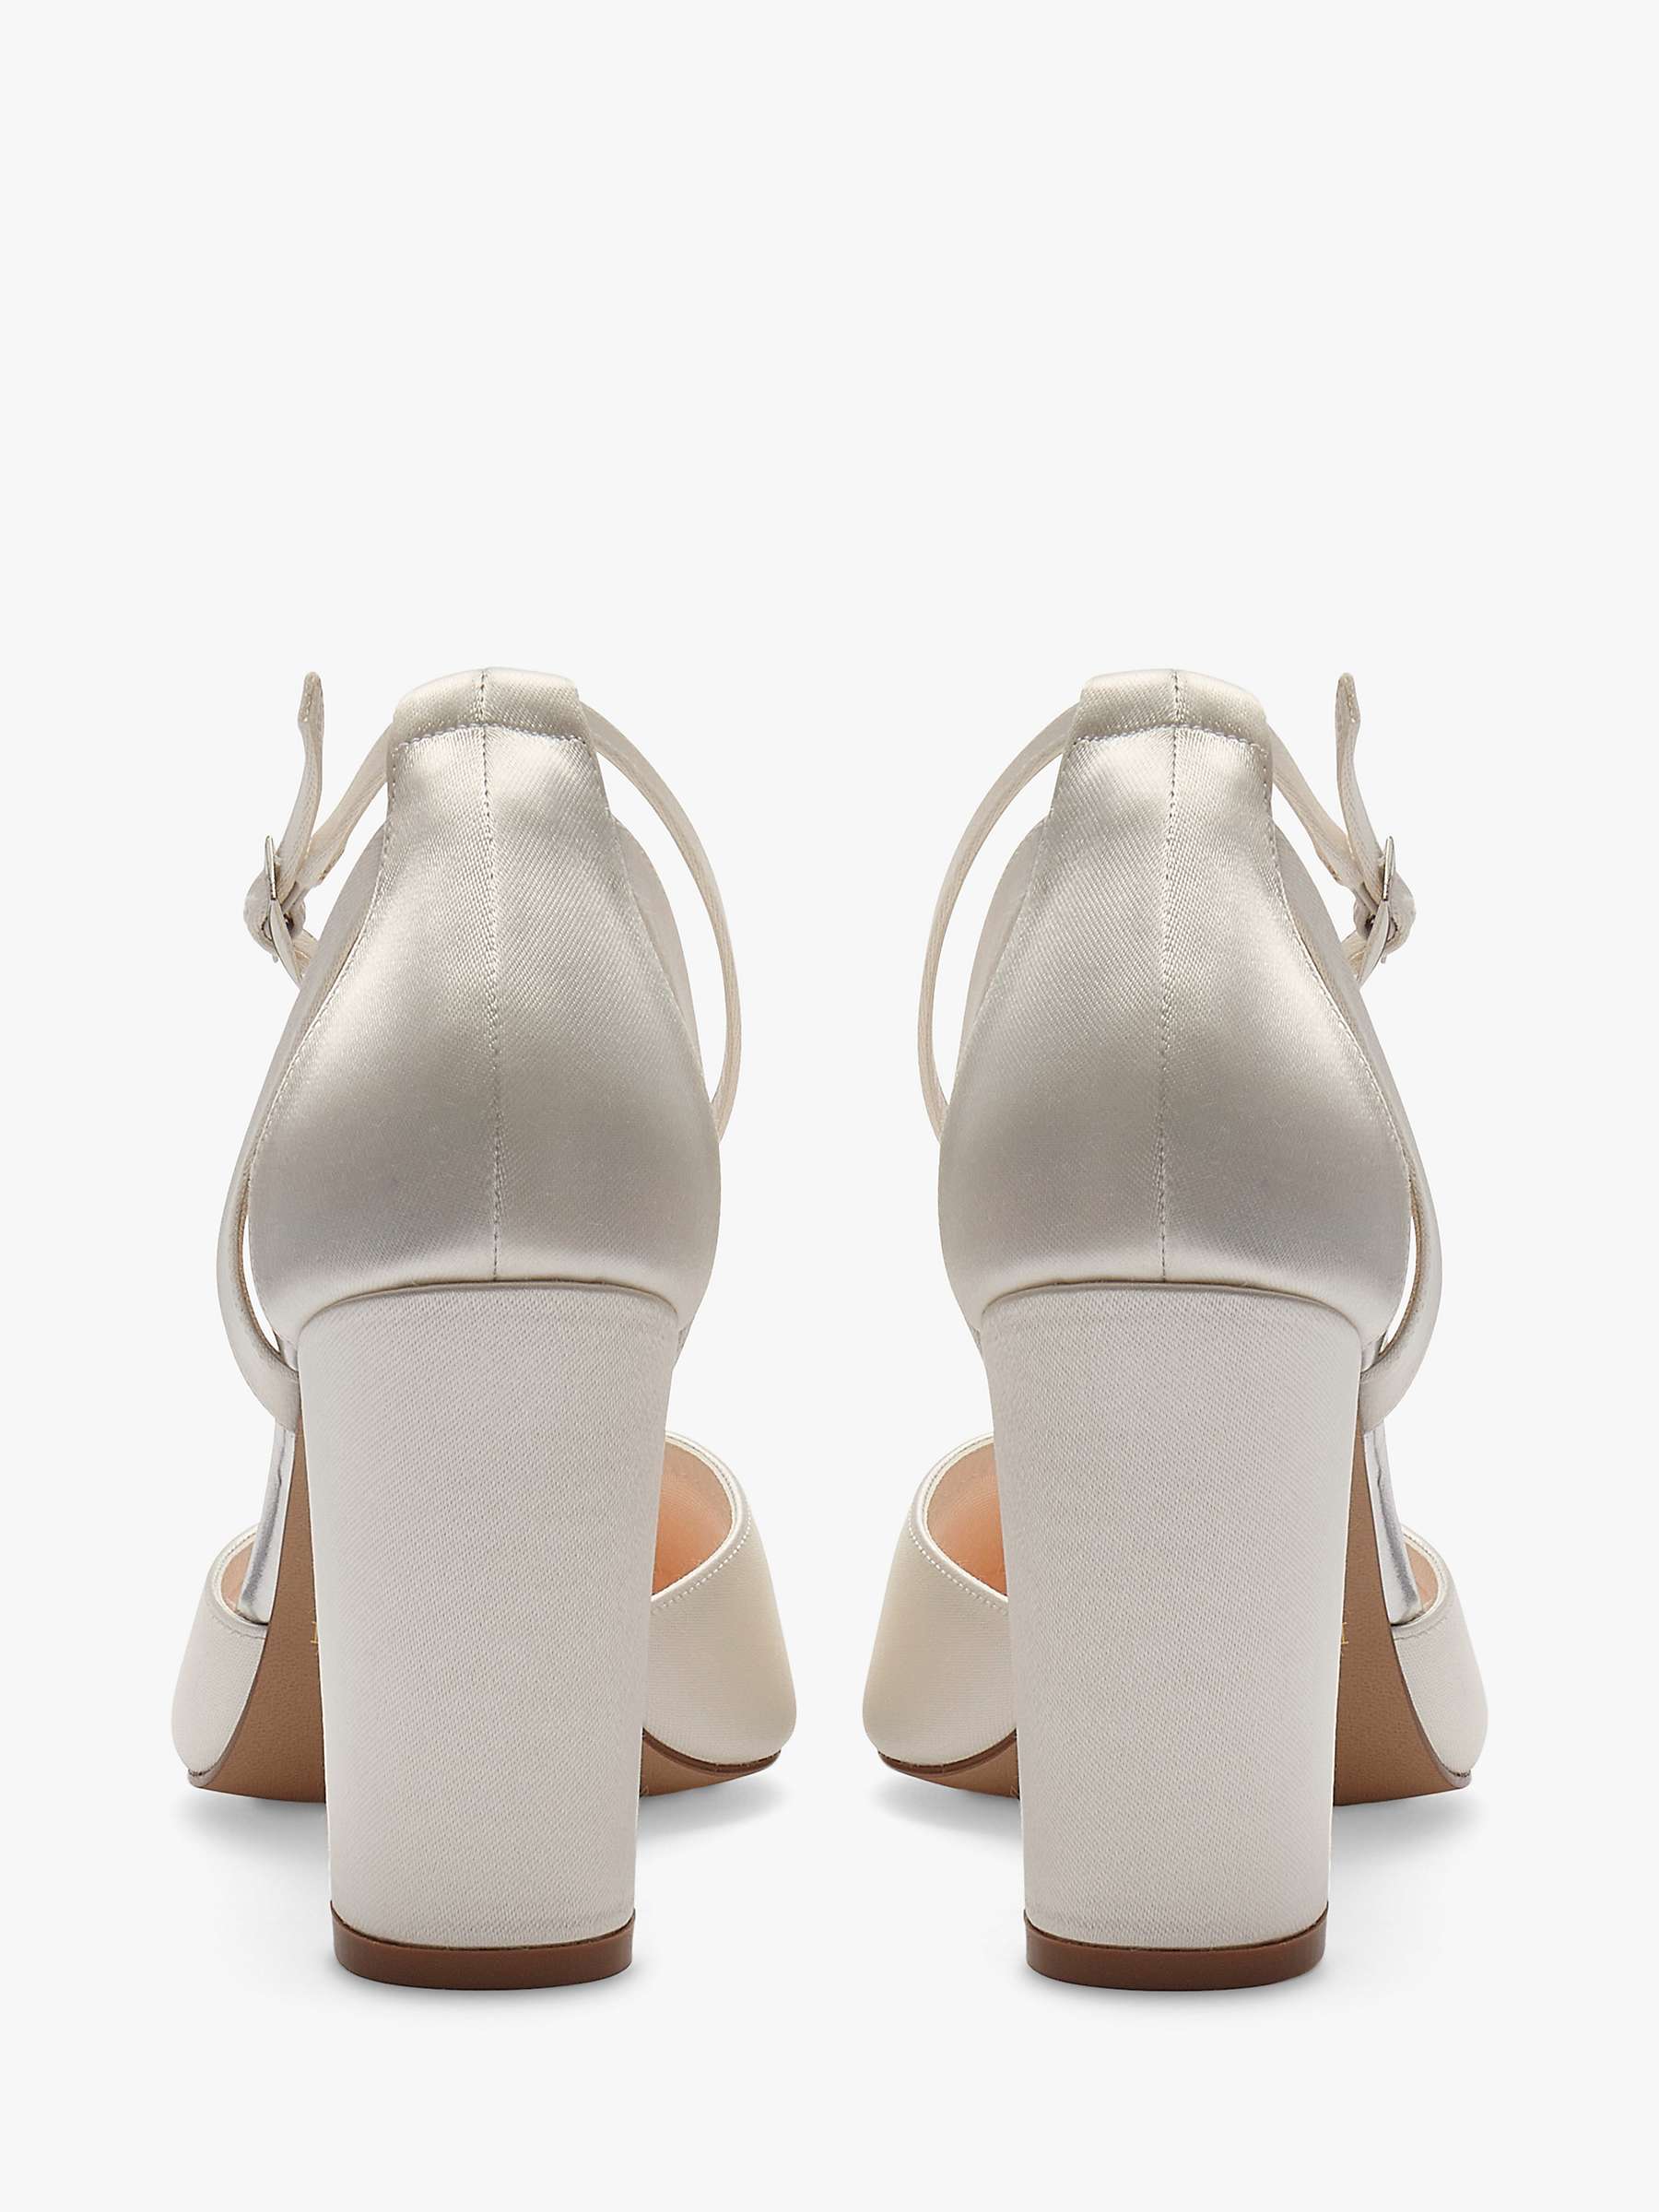 Buy Rainbow Club Eve Block Heel Strappy Court Shoes, Ivory Satin Online at johnlewis.com